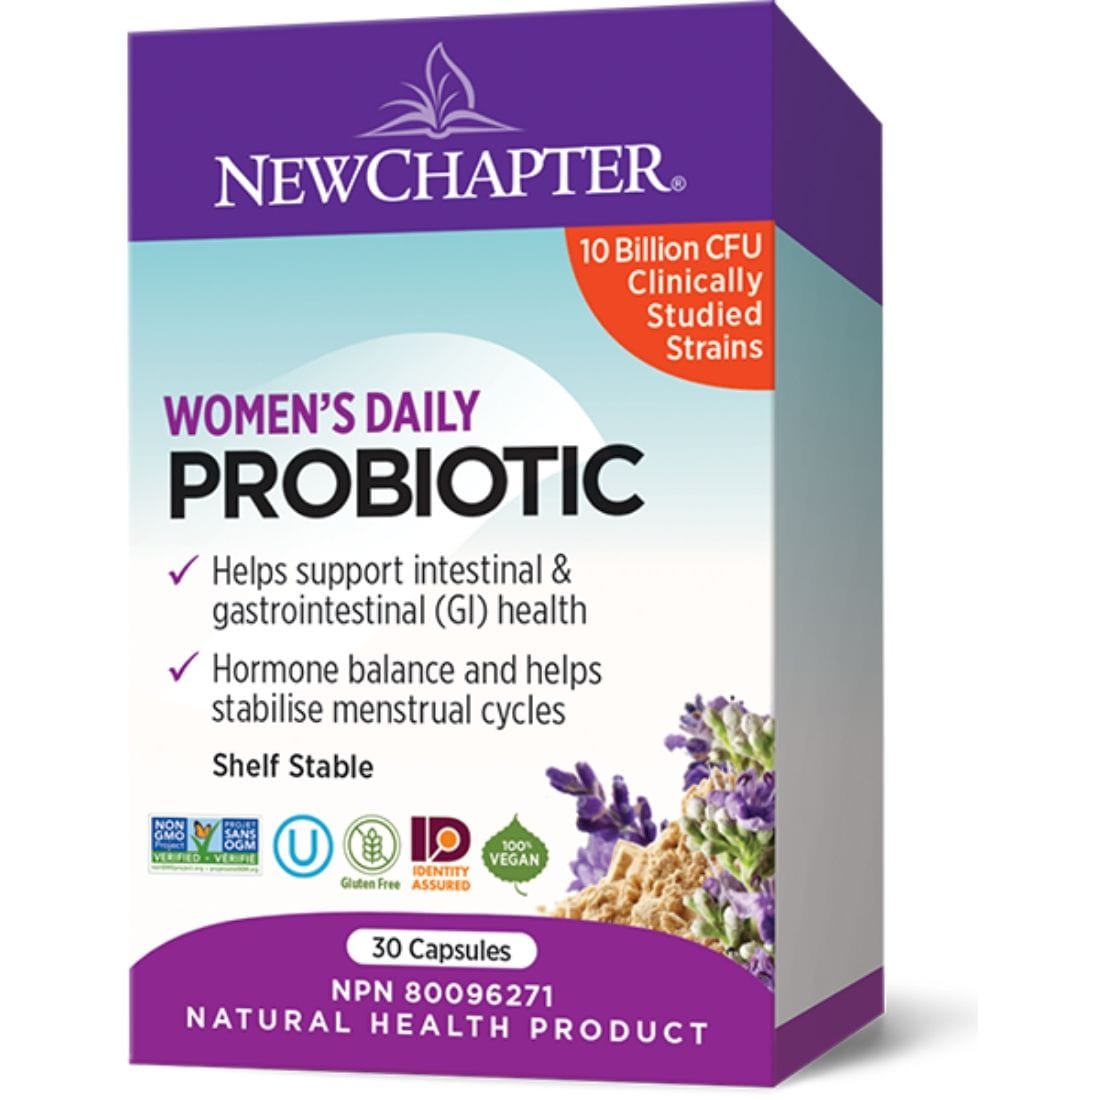 New Chapter Probiotic Women's Daily, 30 Capsules